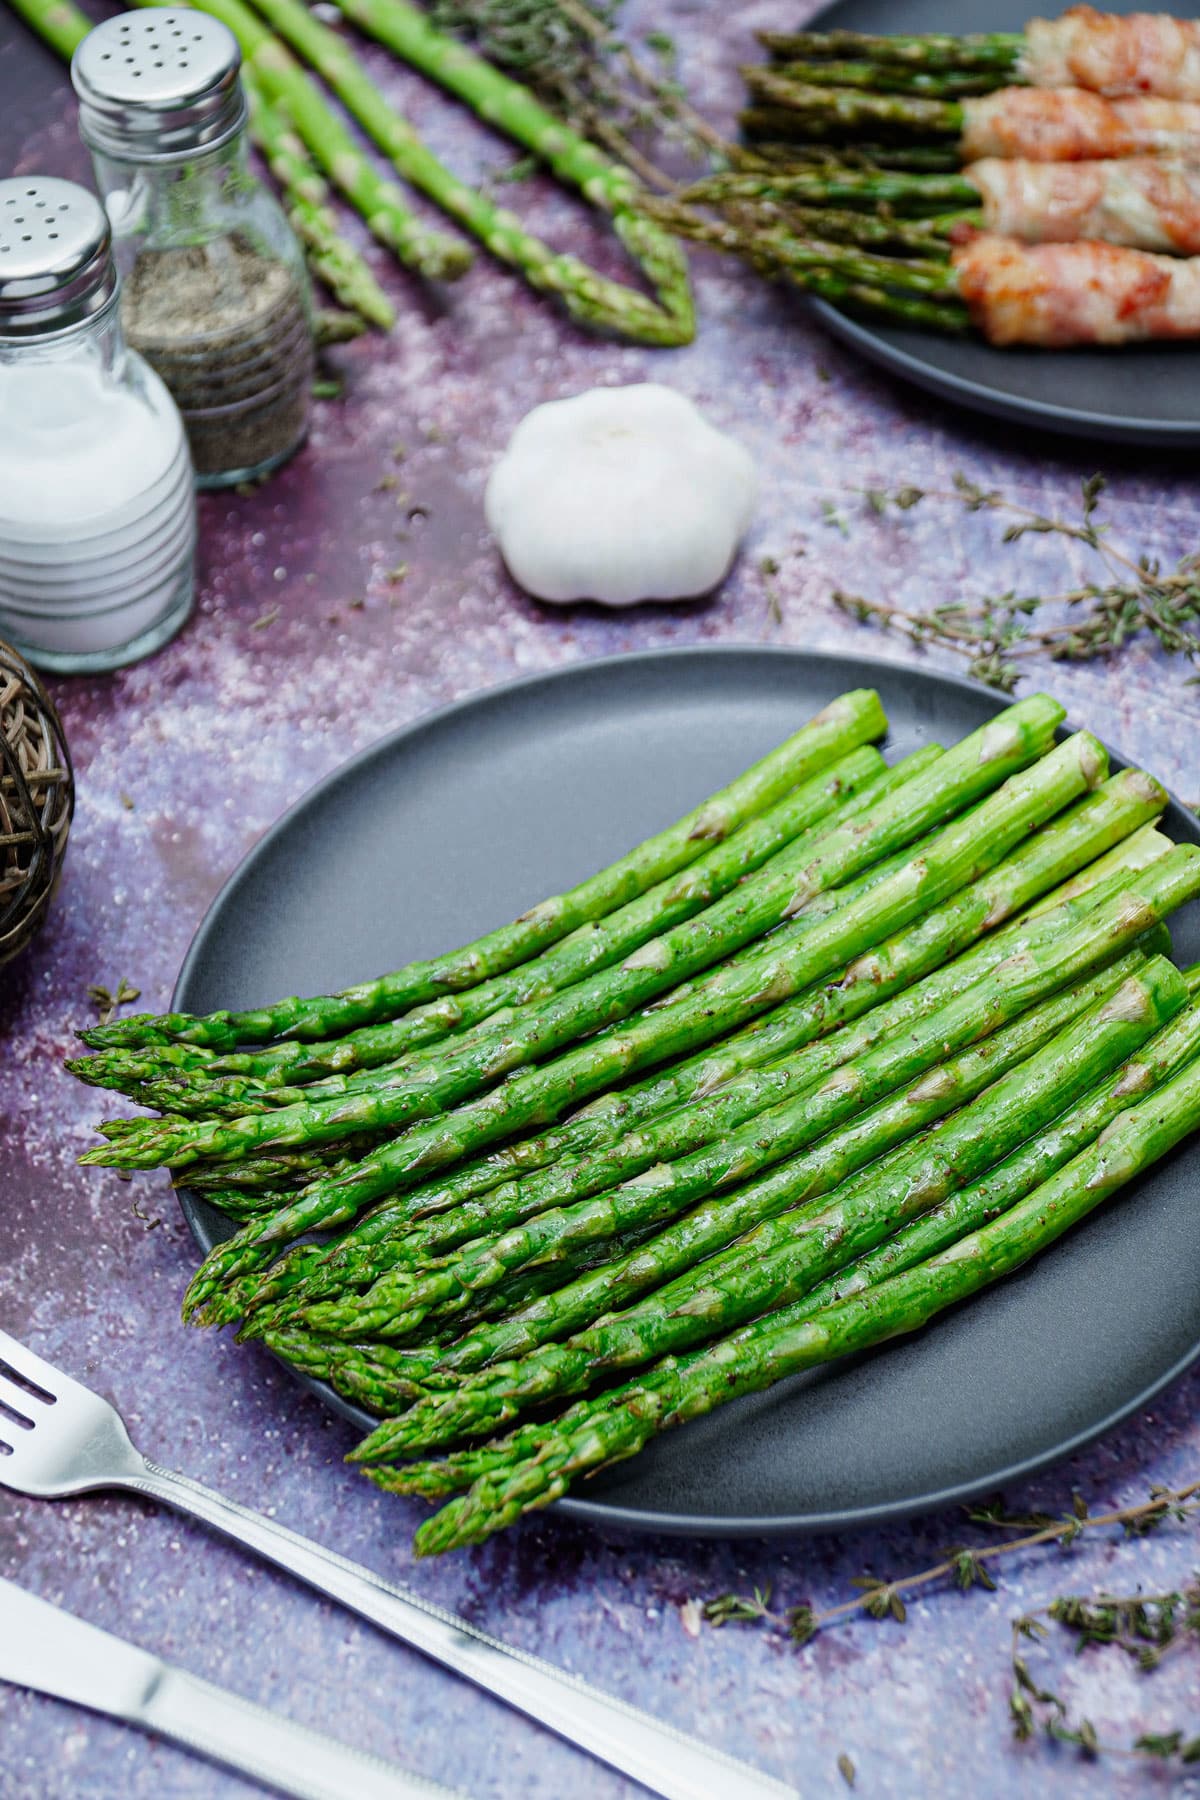 Air fryer garlic roasted asparagus recipe bite shot, served on a black plate with garlic on the background.